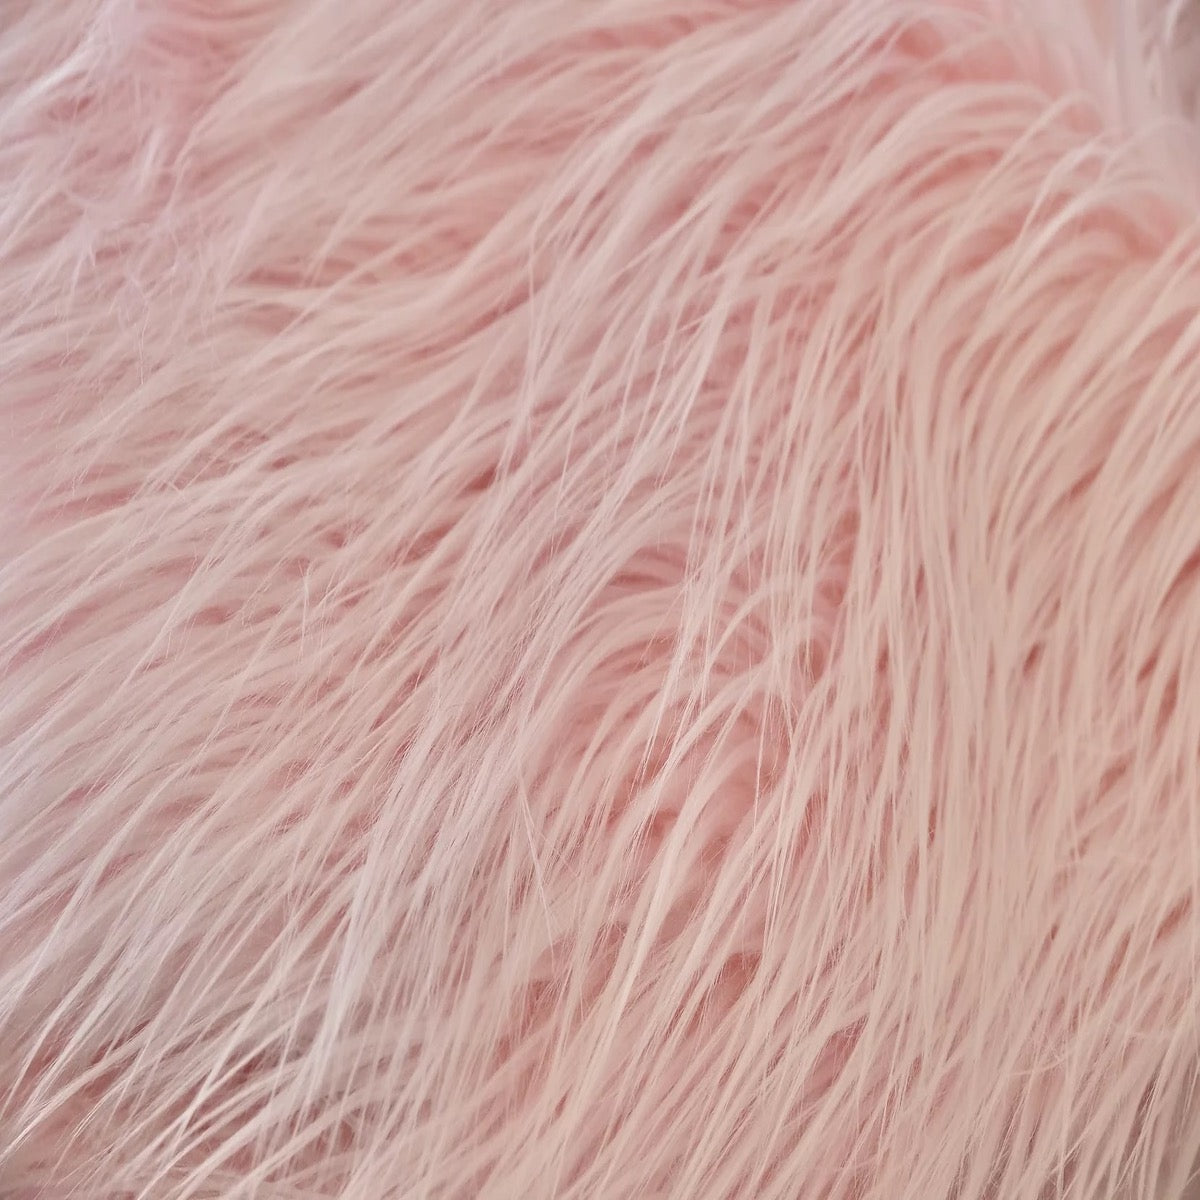 Eden LIGHT PINK Shaggy Long Pile Soft Faux Fur Fabric for Fursuit, Cosplay  Costume, Photo Prop, Trim, Throw Pillow, Crafts -  Canada